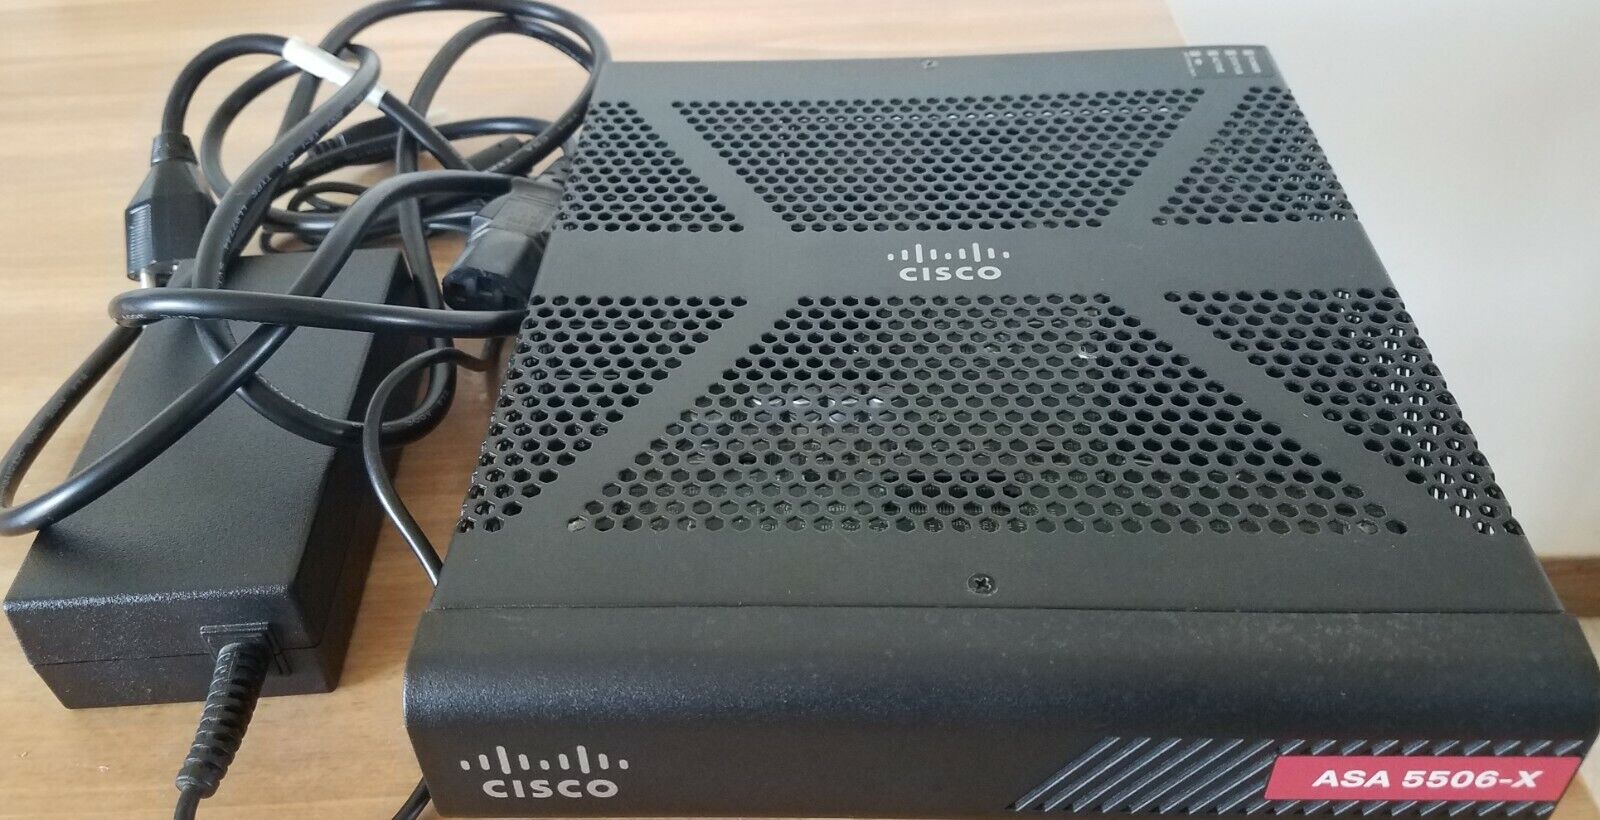 Cisco ASA 5506-X Network Security Firewall Security Plus License w/power supply